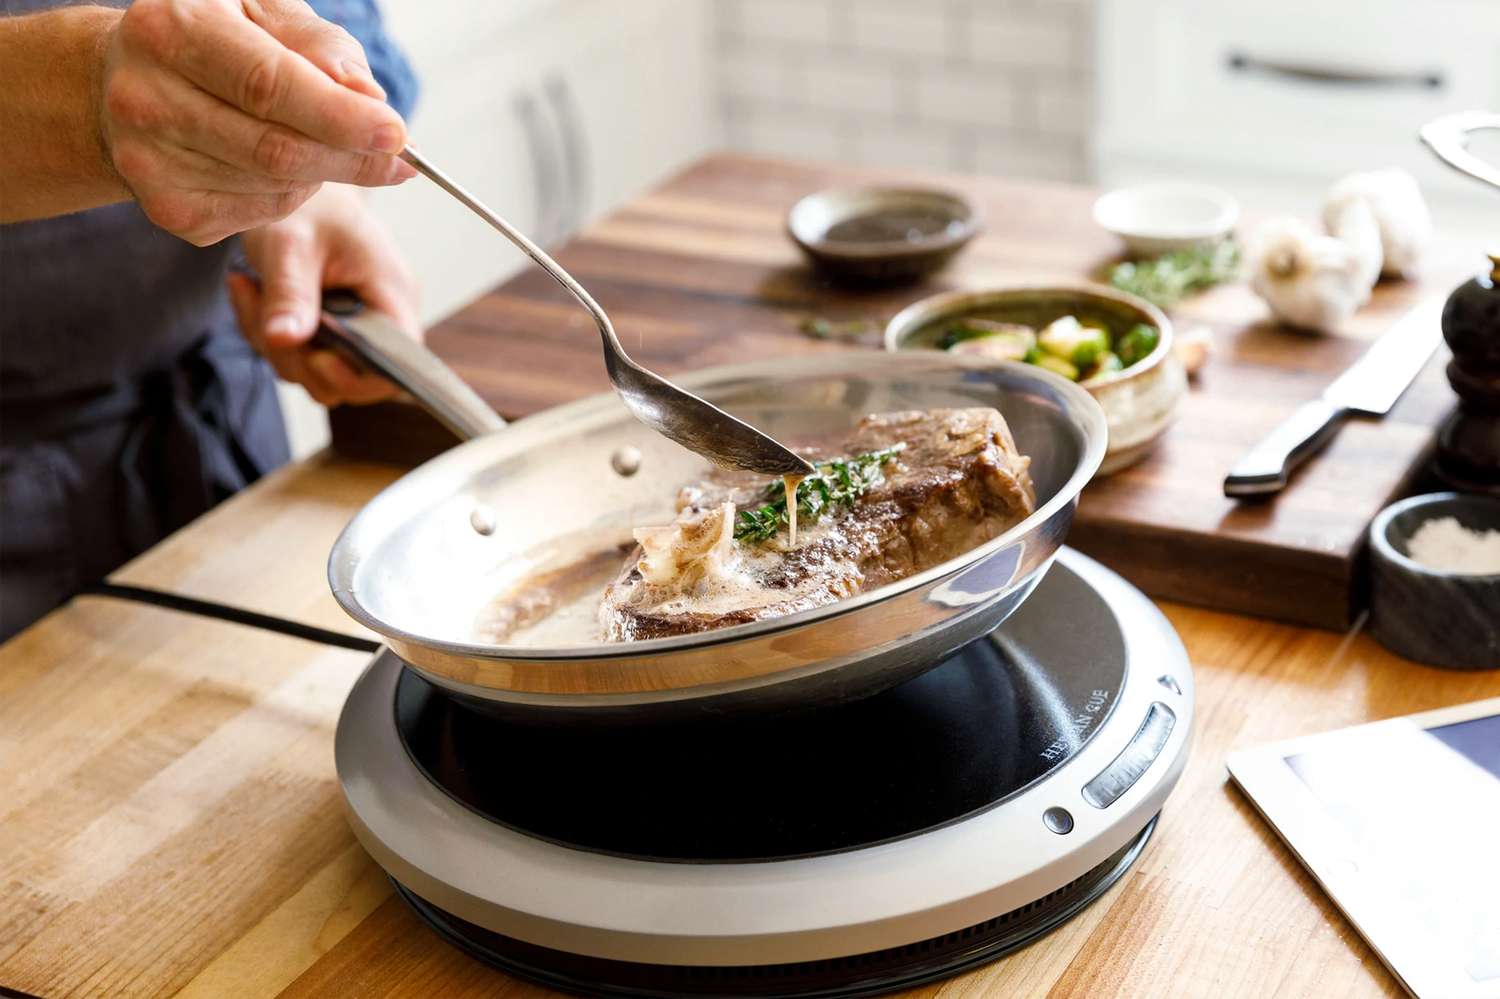 Person cooking over a portable induction cooktop